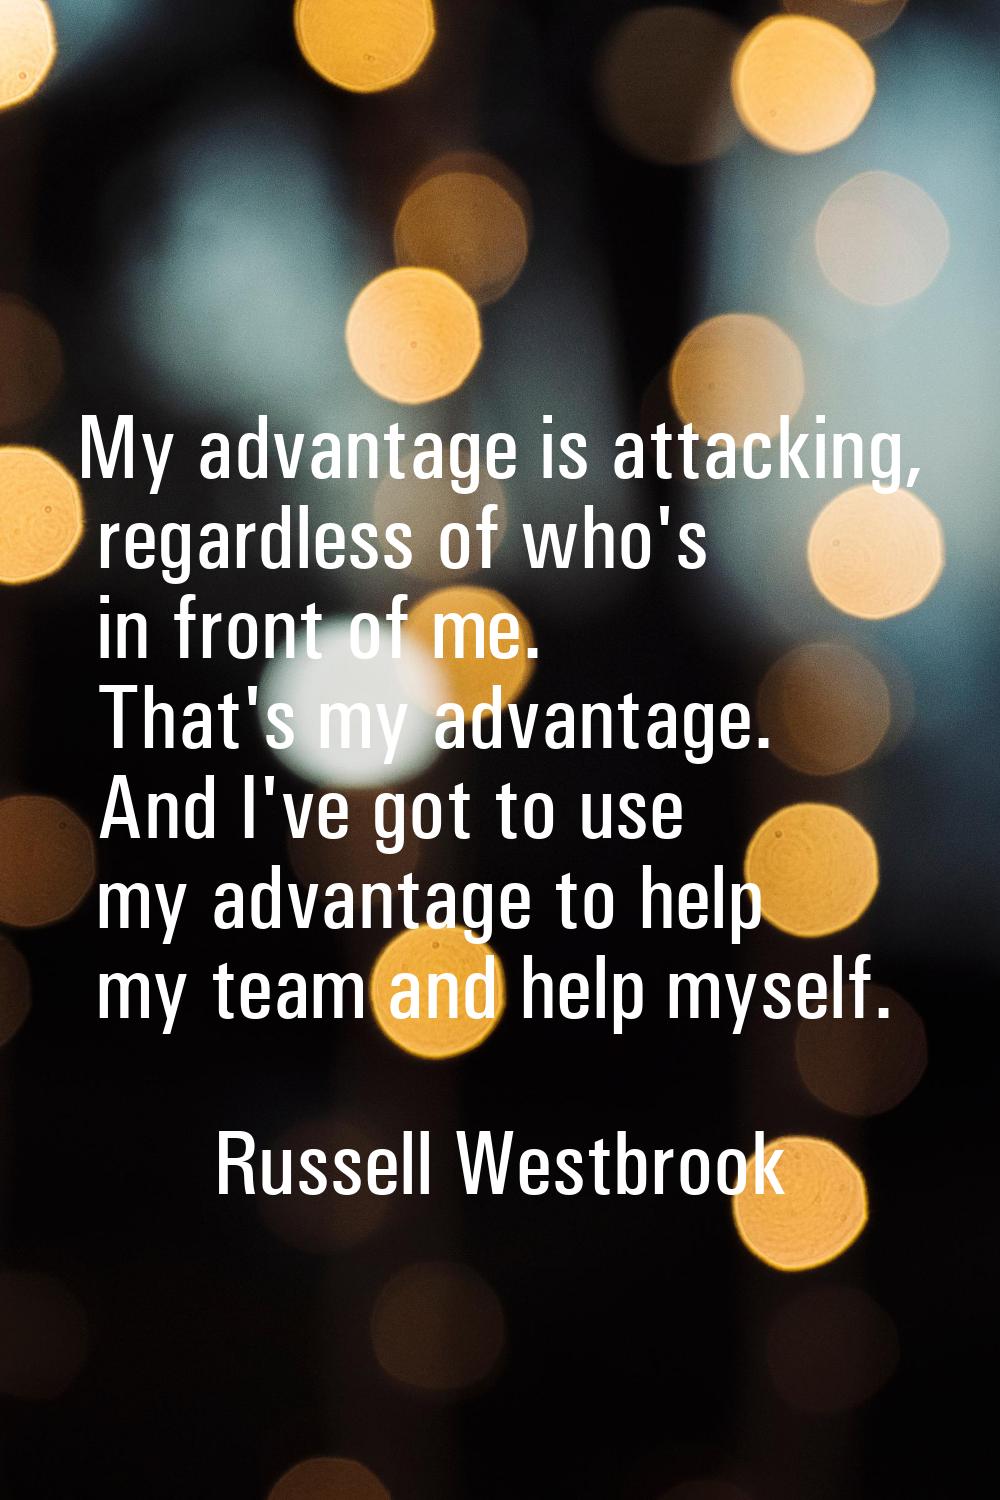 My advantage is attacking, regardless of who's in front of me. That's my advantage. And I've got to